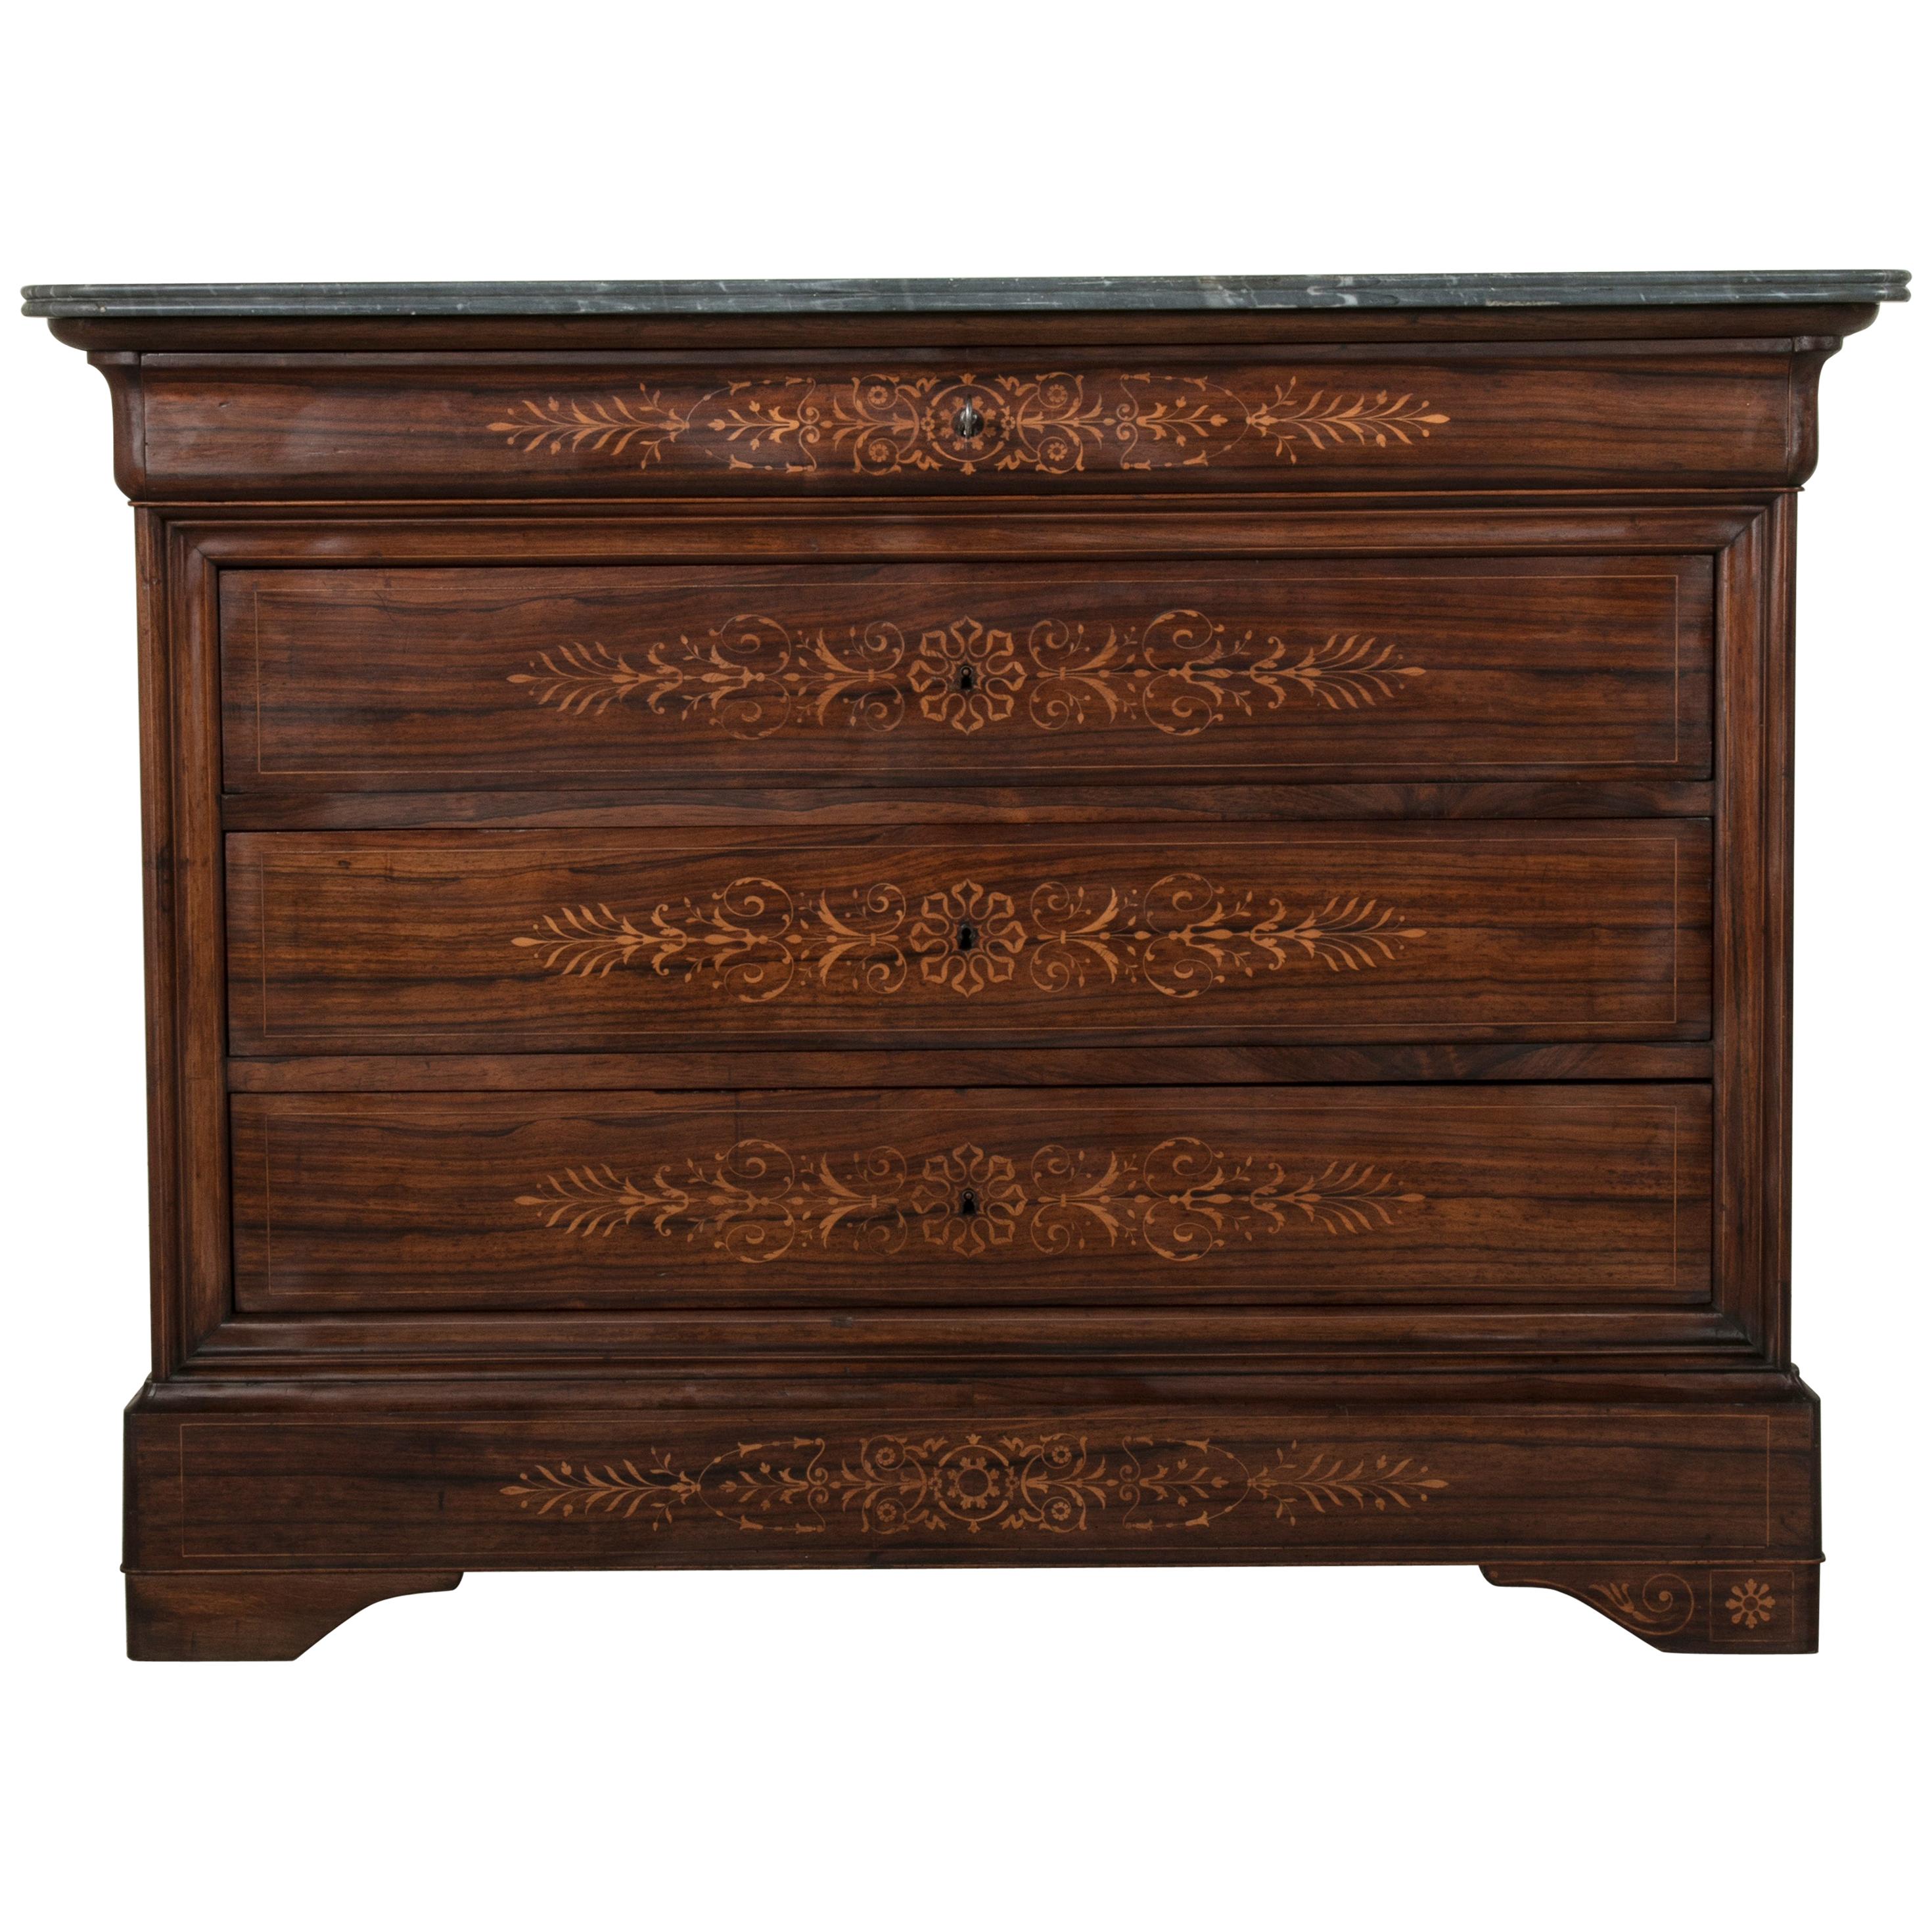 French Charles X Period Palisander and Lemonwood Marquetry Chest, circa 1820